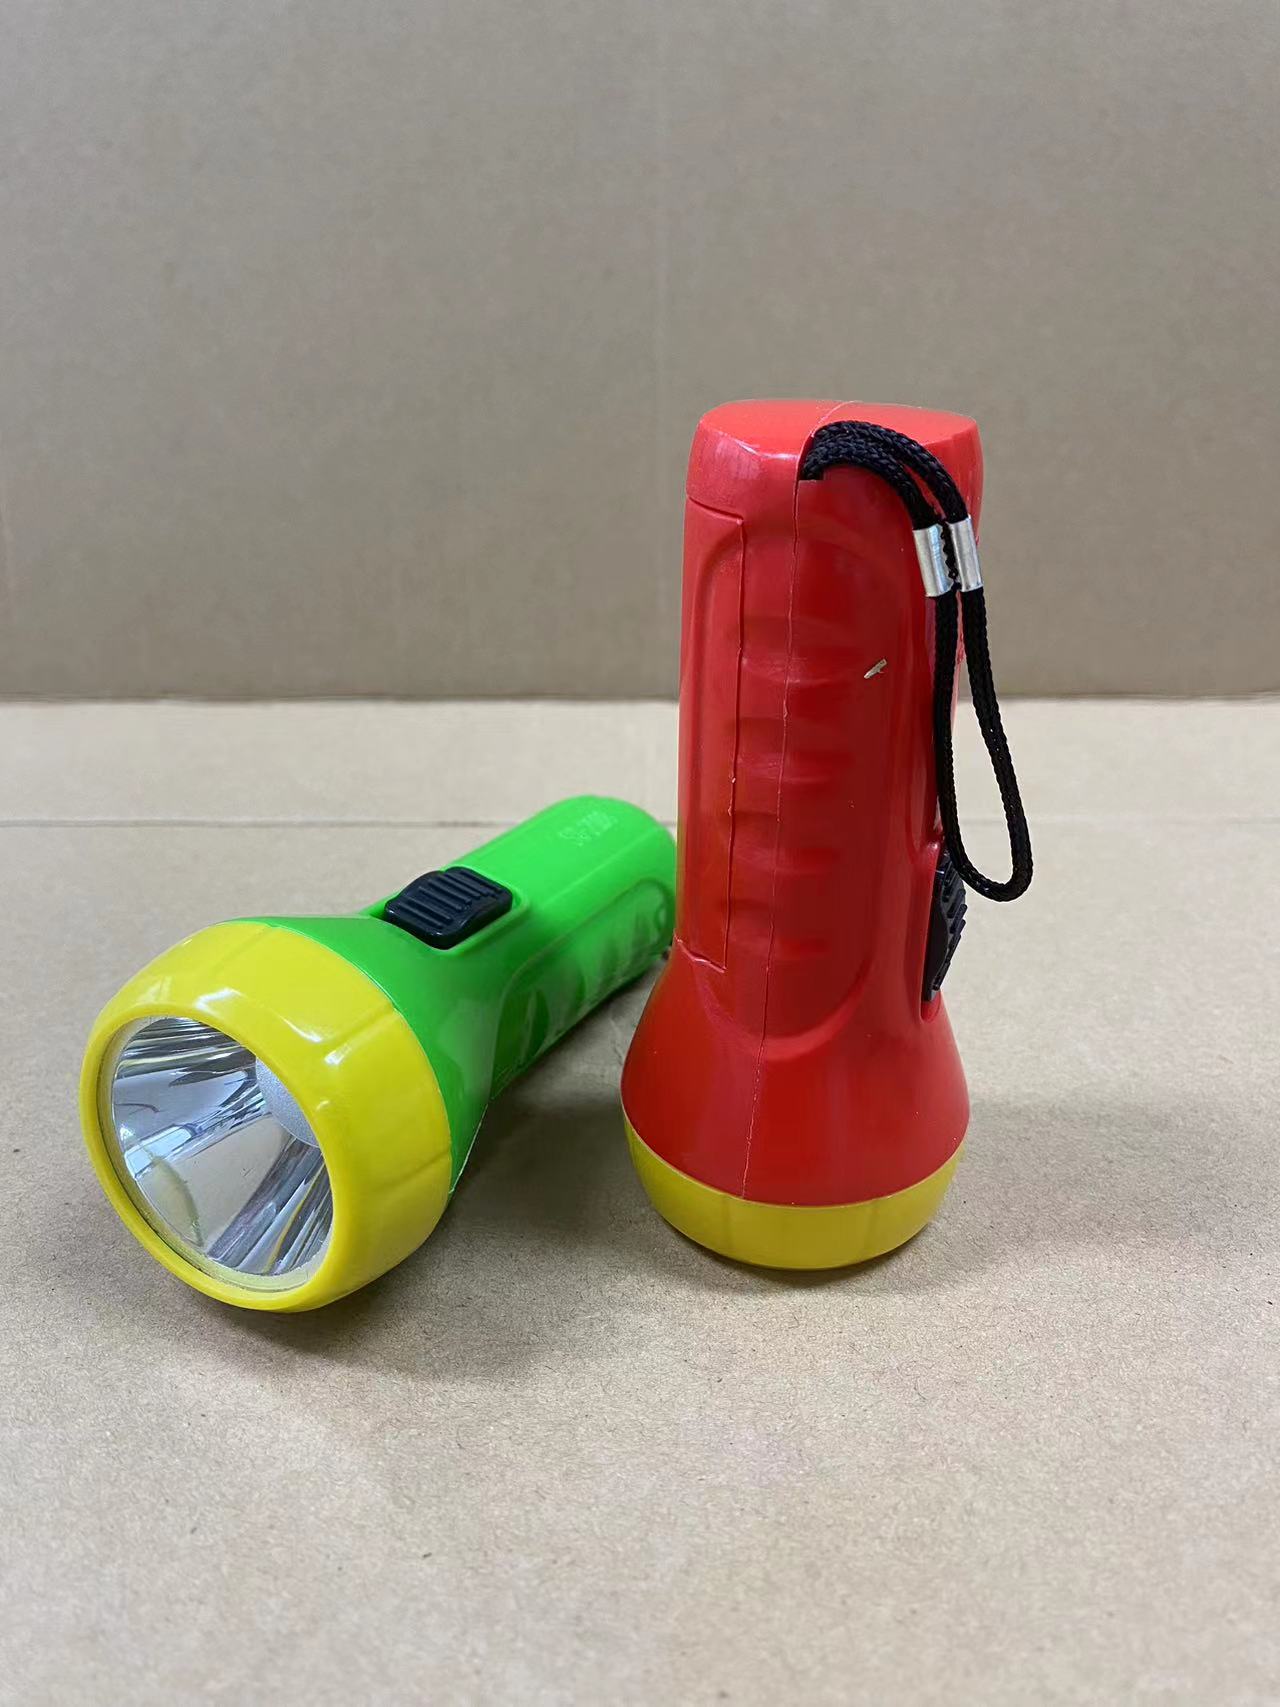 New design electric torch factory in China Cheap